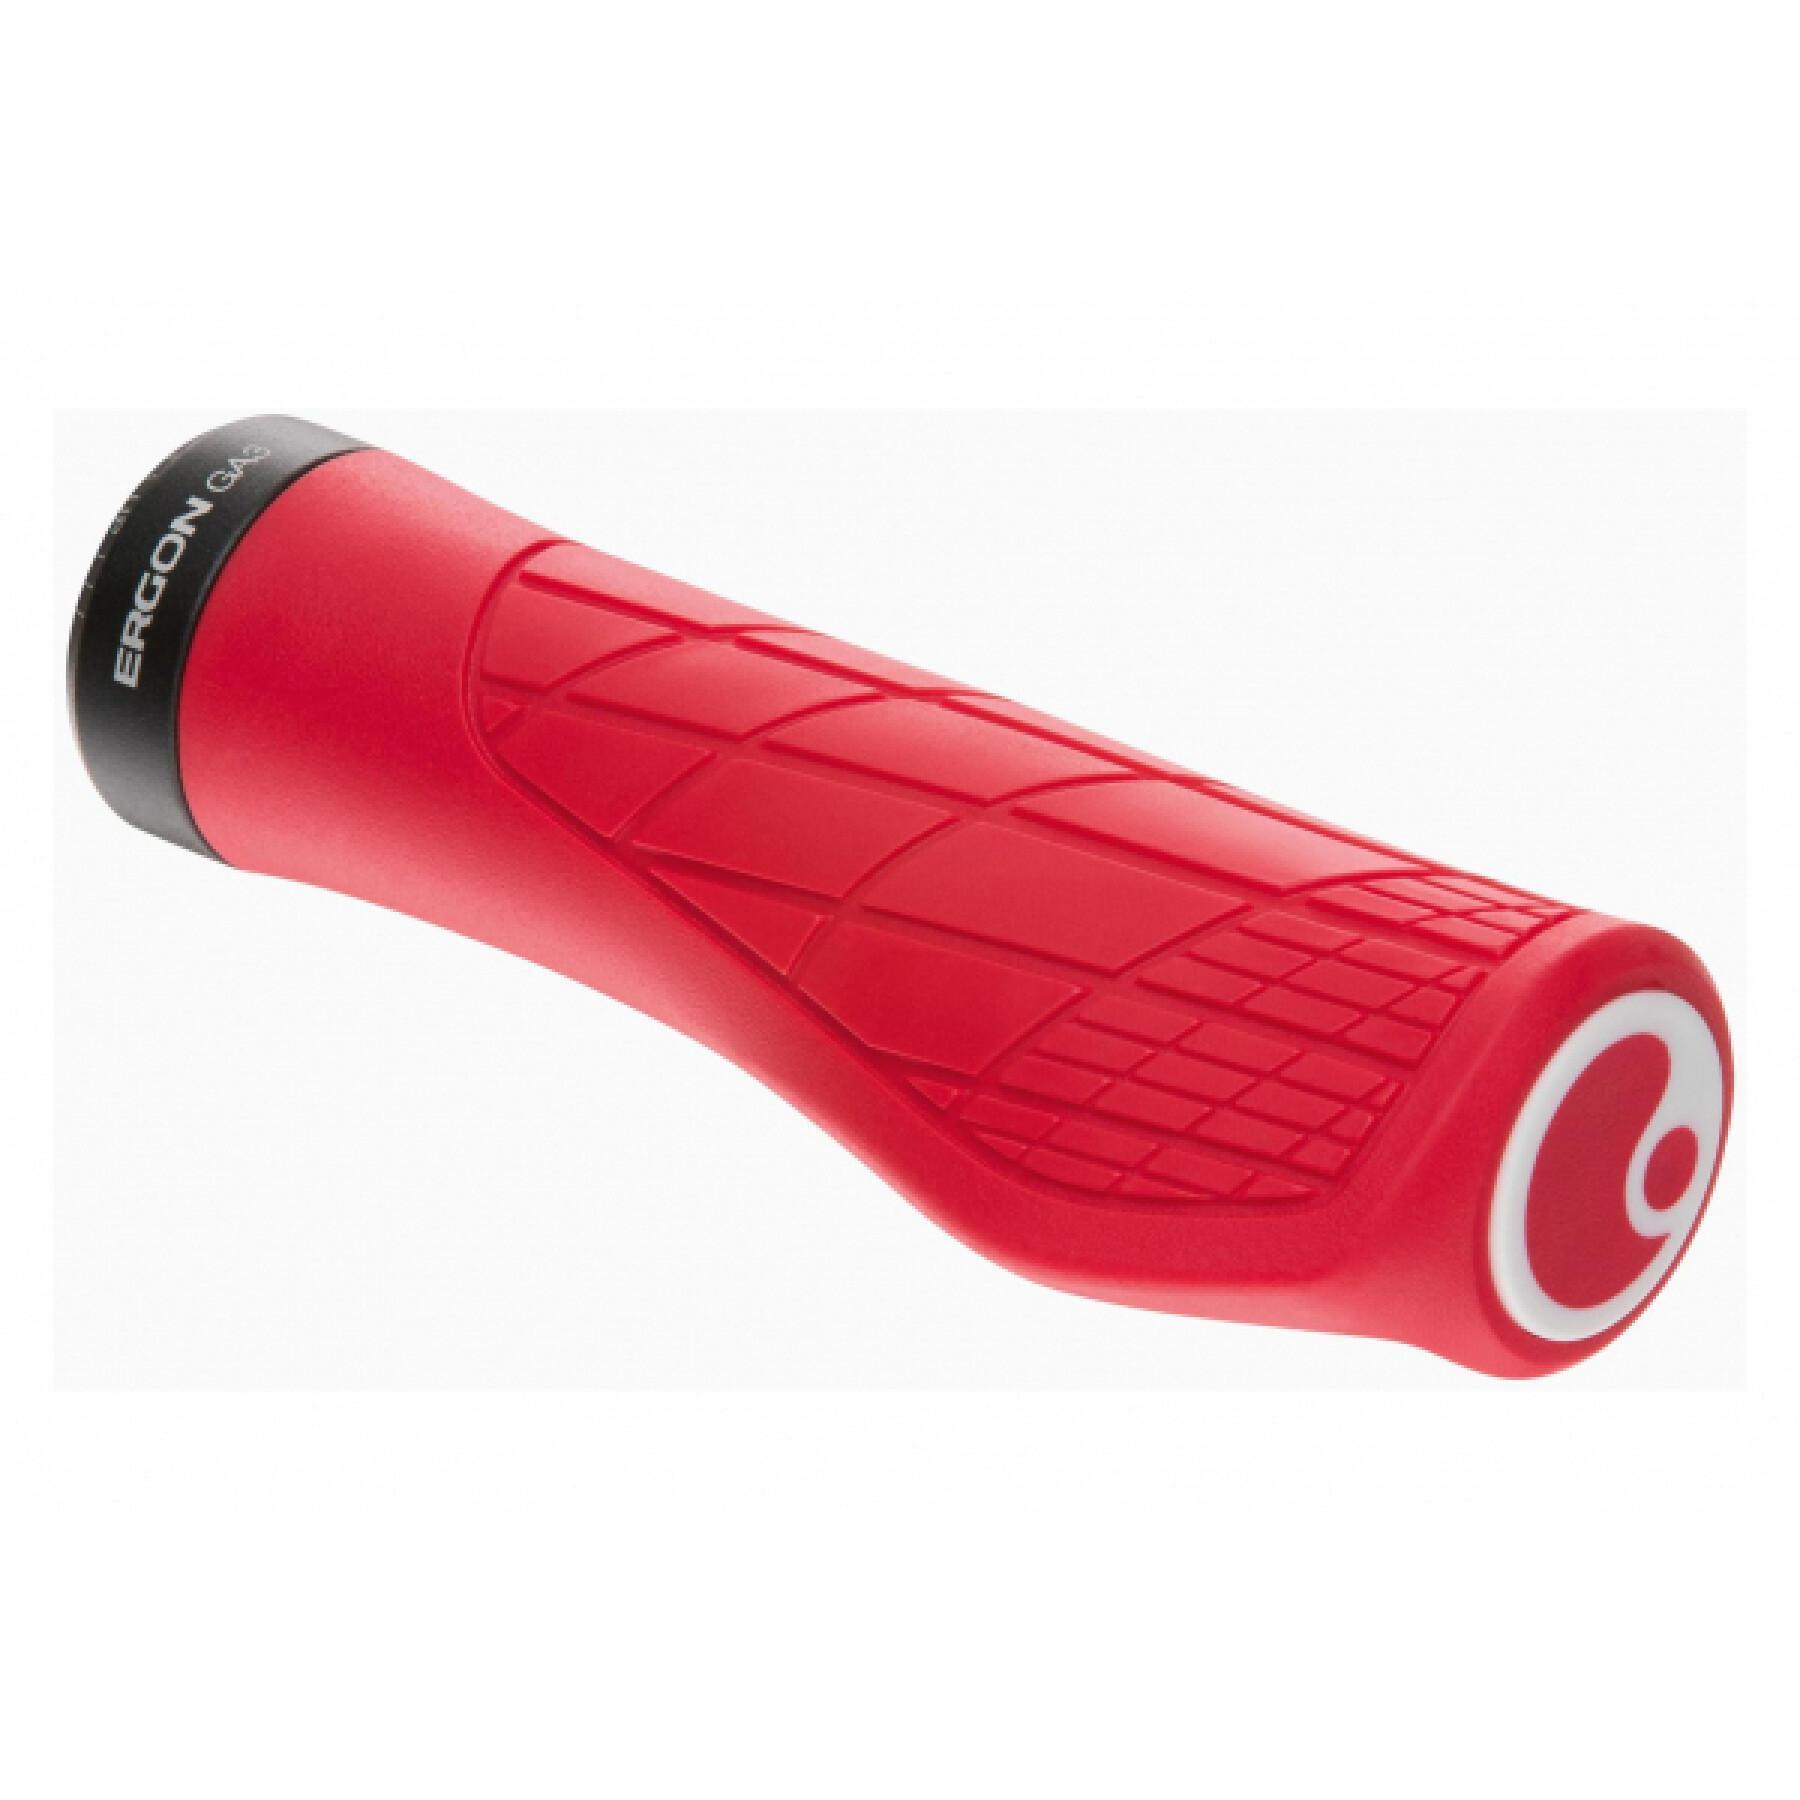 Griffe Ergon technical GA3 large Risky Red